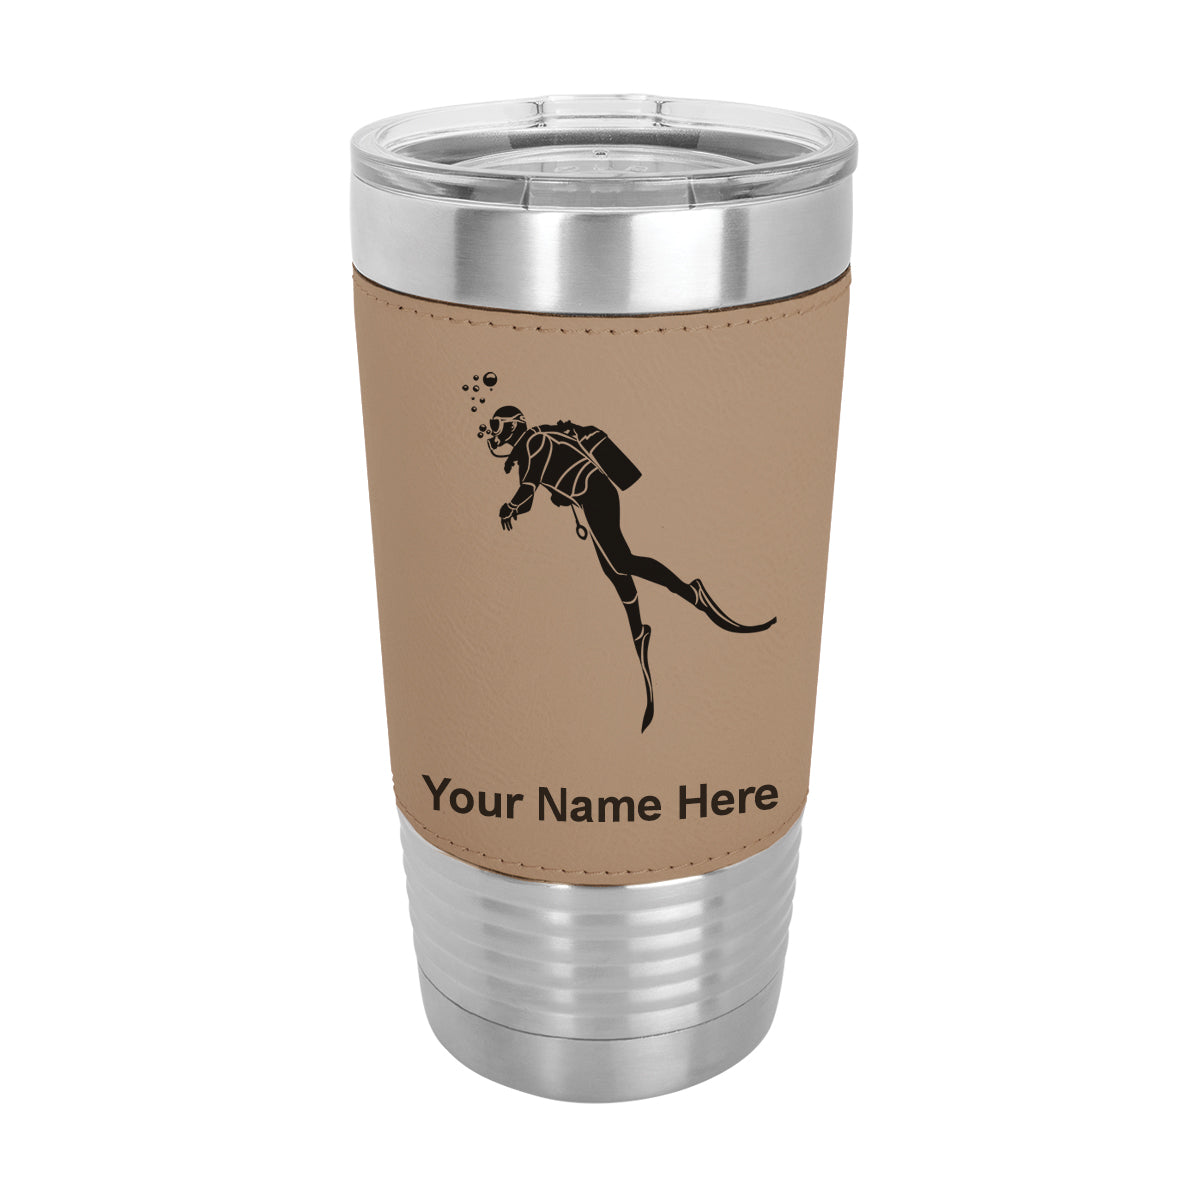 20oz Faux Leather Tumbler Mug, Scuba Diver, Personalized Engraving Included - LaserGram Custom Engraved Gifts